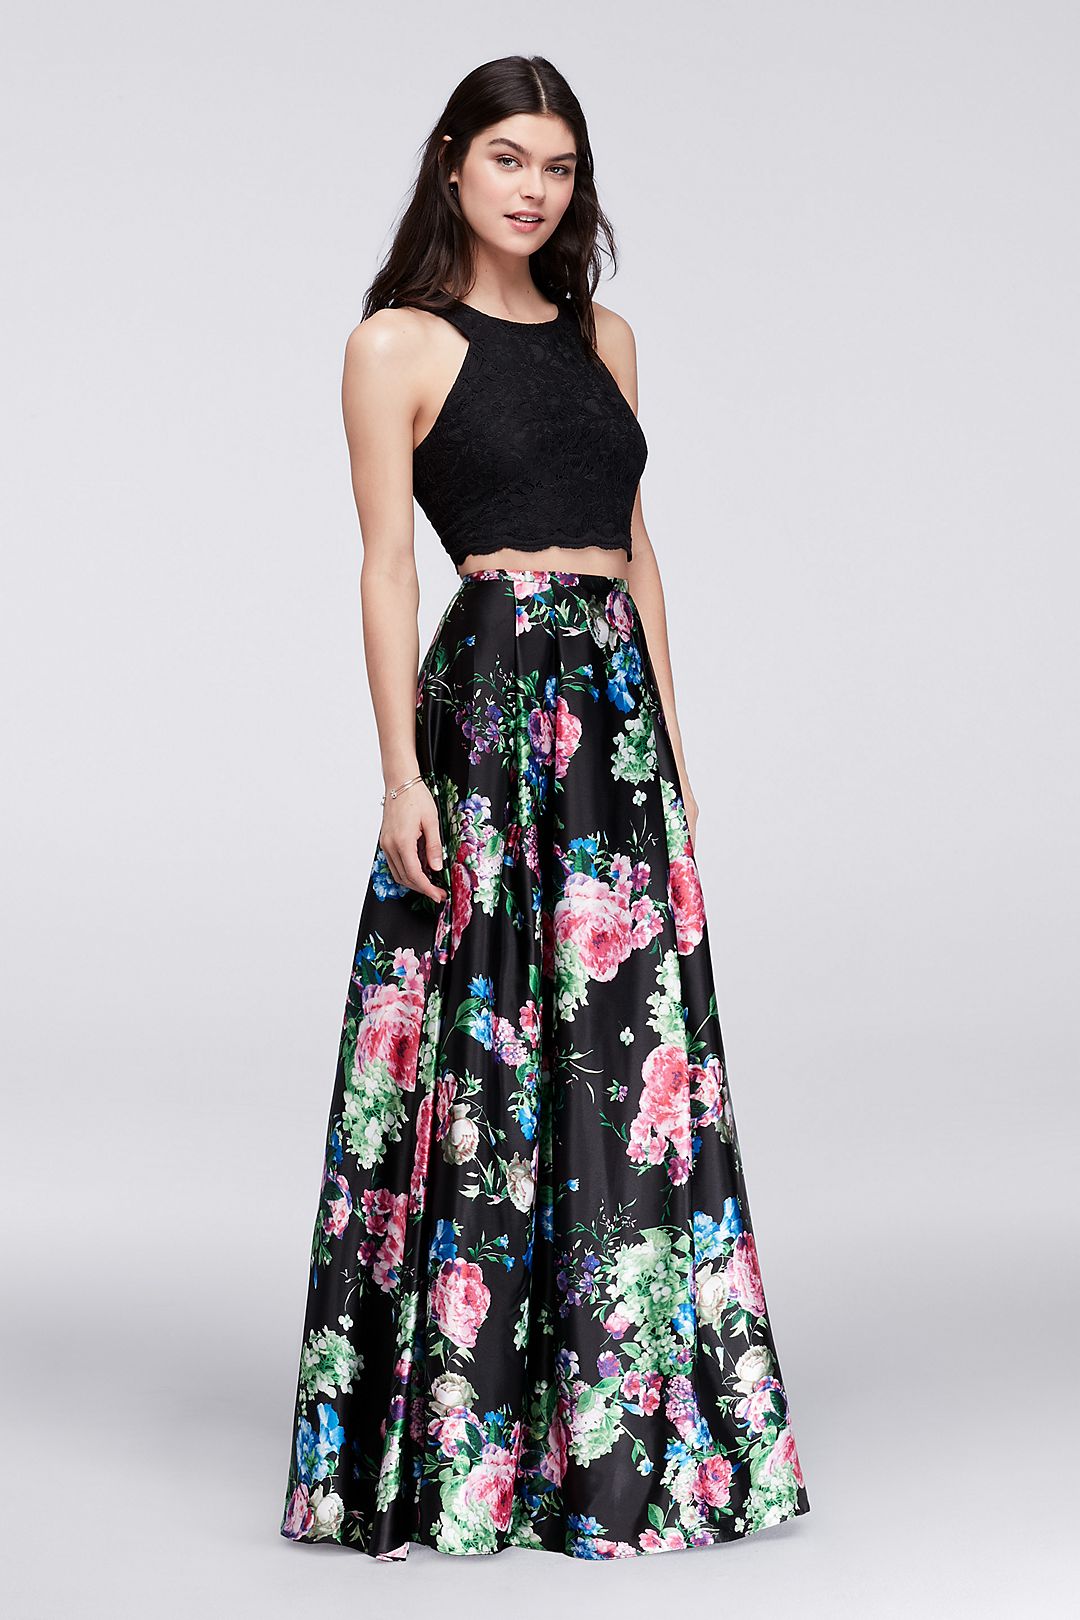 Cutaway Crop Top and Floral Skirt Two-Piece Set Image 1